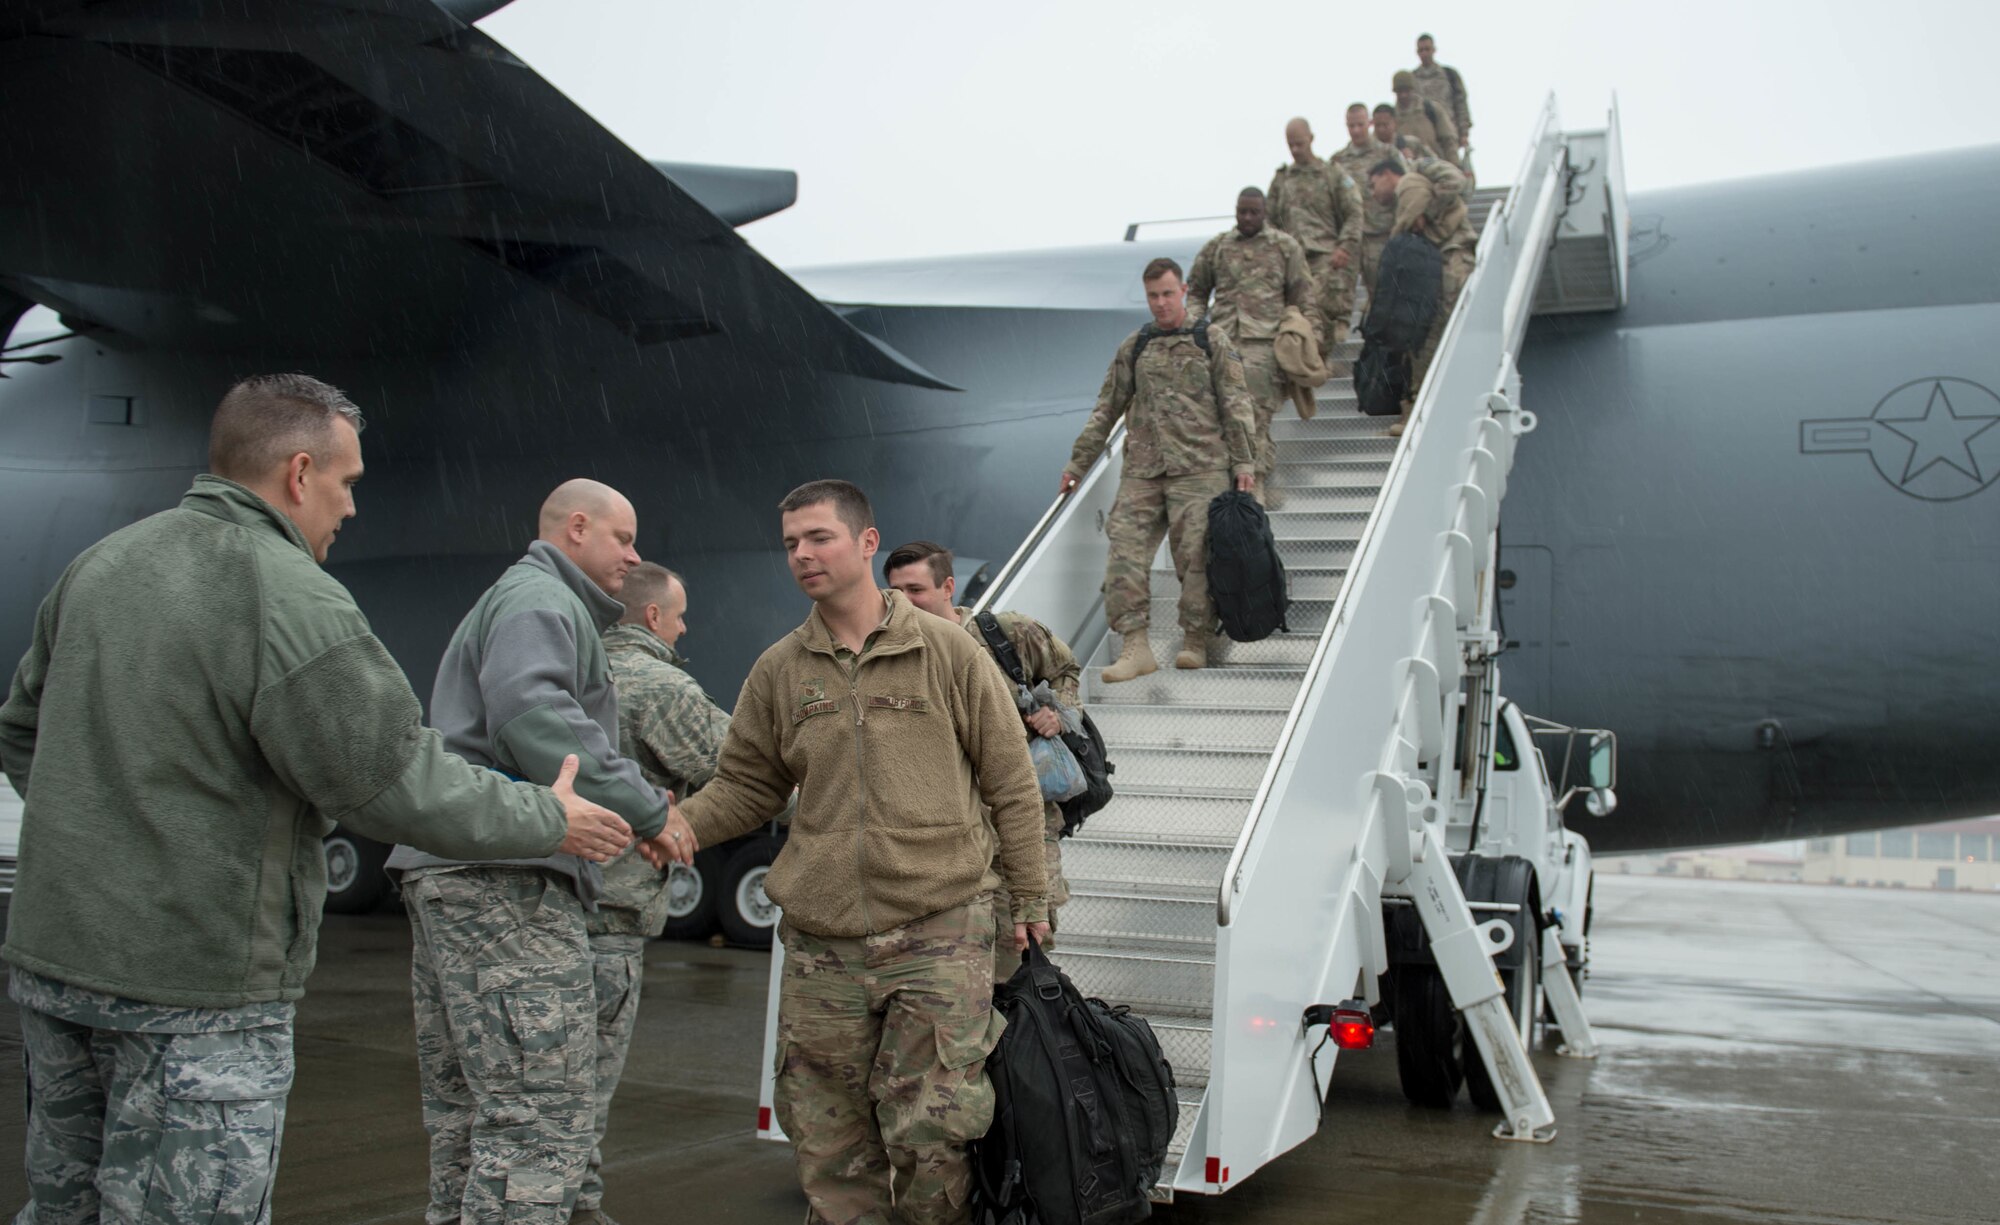 621st Contingency Response Wing leadership greets Airmen as they return from a three-month deployment to Iraq, in support of Operation Inherent Resolve, Jan. 18, 2017, at Travis Air Force Base, California. The CRW played a crucial role in reopening Qayyarah West Airfield and moving more than 1,423 short tons of cargo in and out of the region. (U.S. Air Force Photo by Staff Sgt. Robert Hicks)